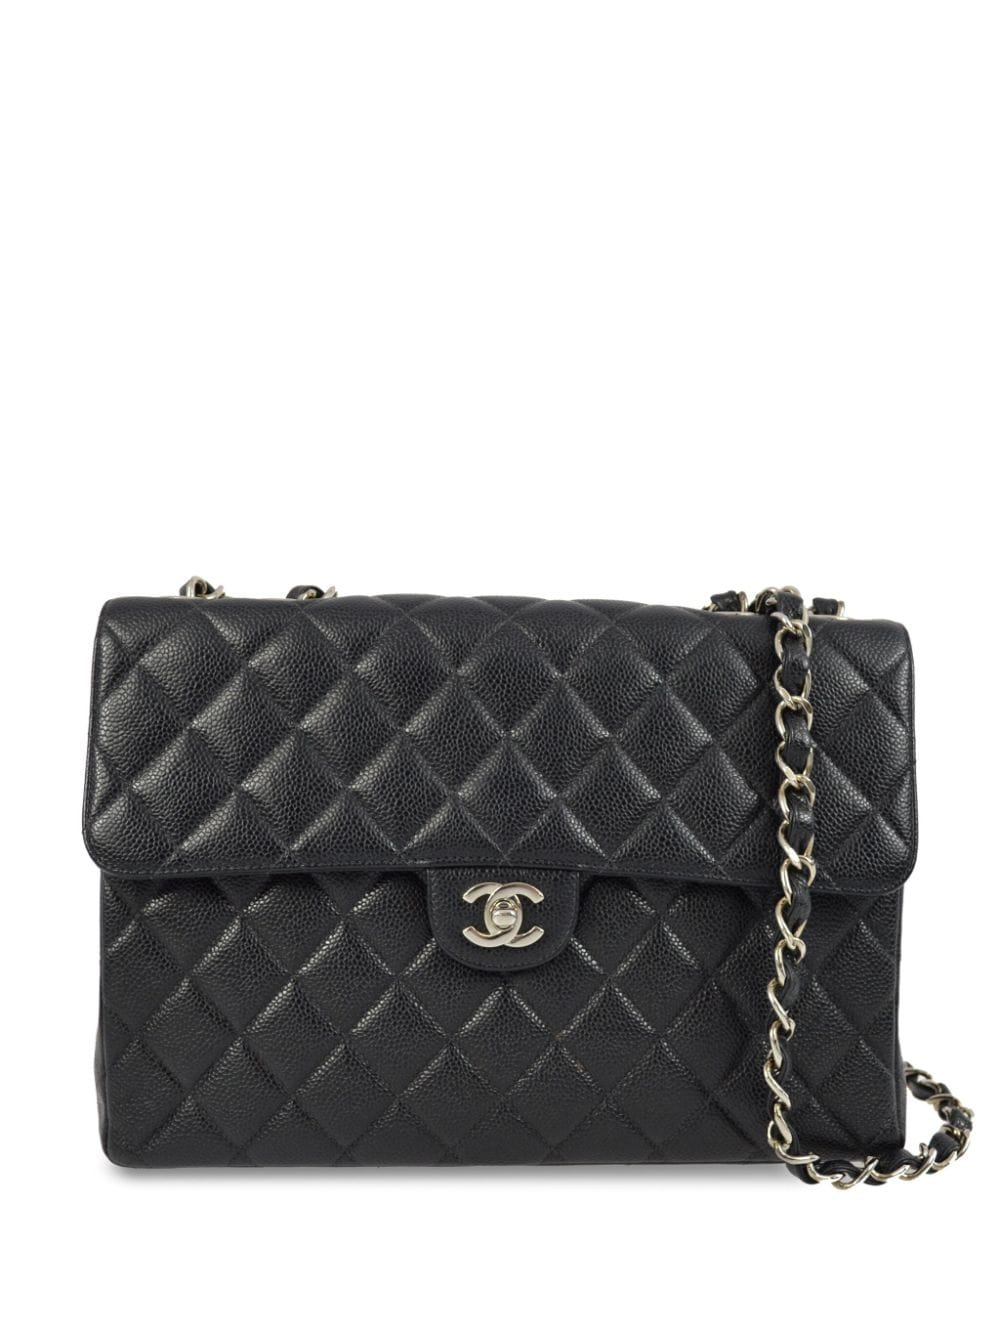 Pre-owned Chanel 2000 Jumbo Classic Flap Shoulder Bag In Black